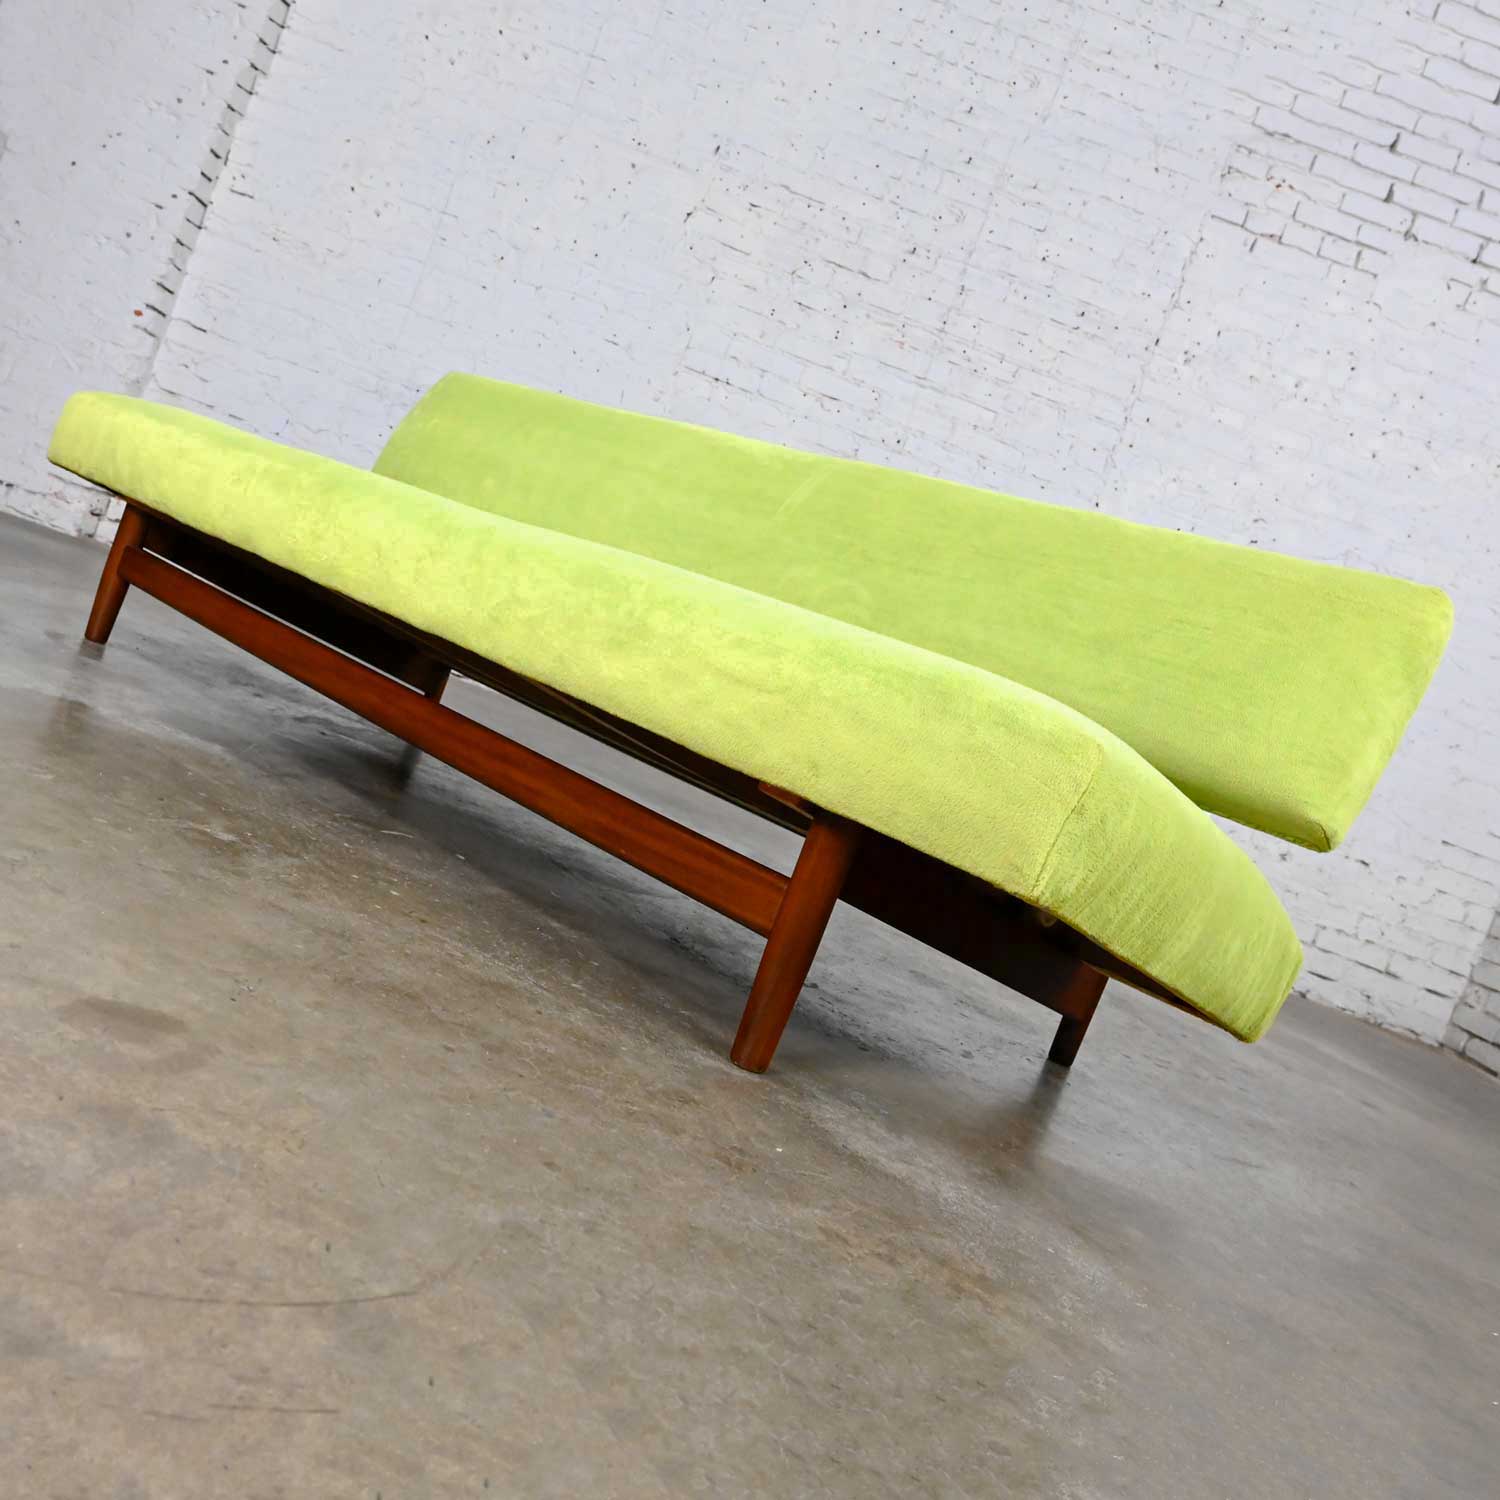 Vintage Scandinavian Modern Dutch Sofa Attributed to Doublet Sofa by Rob Parry for Gelderland